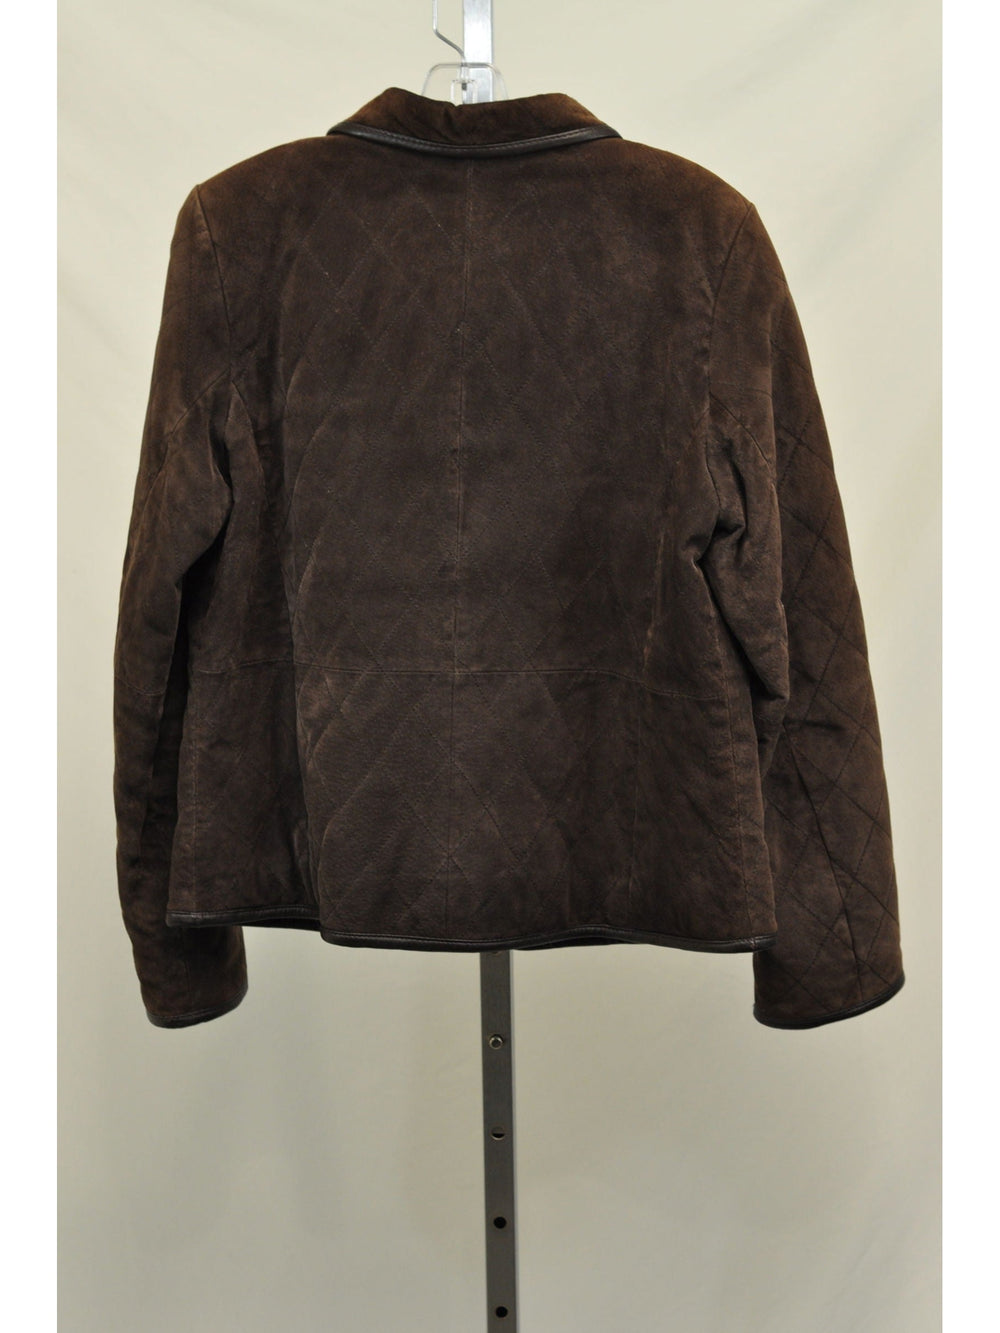 Charter Club Quilted Leather Jacket - Size M - The Kennedy Collective Thrift - 